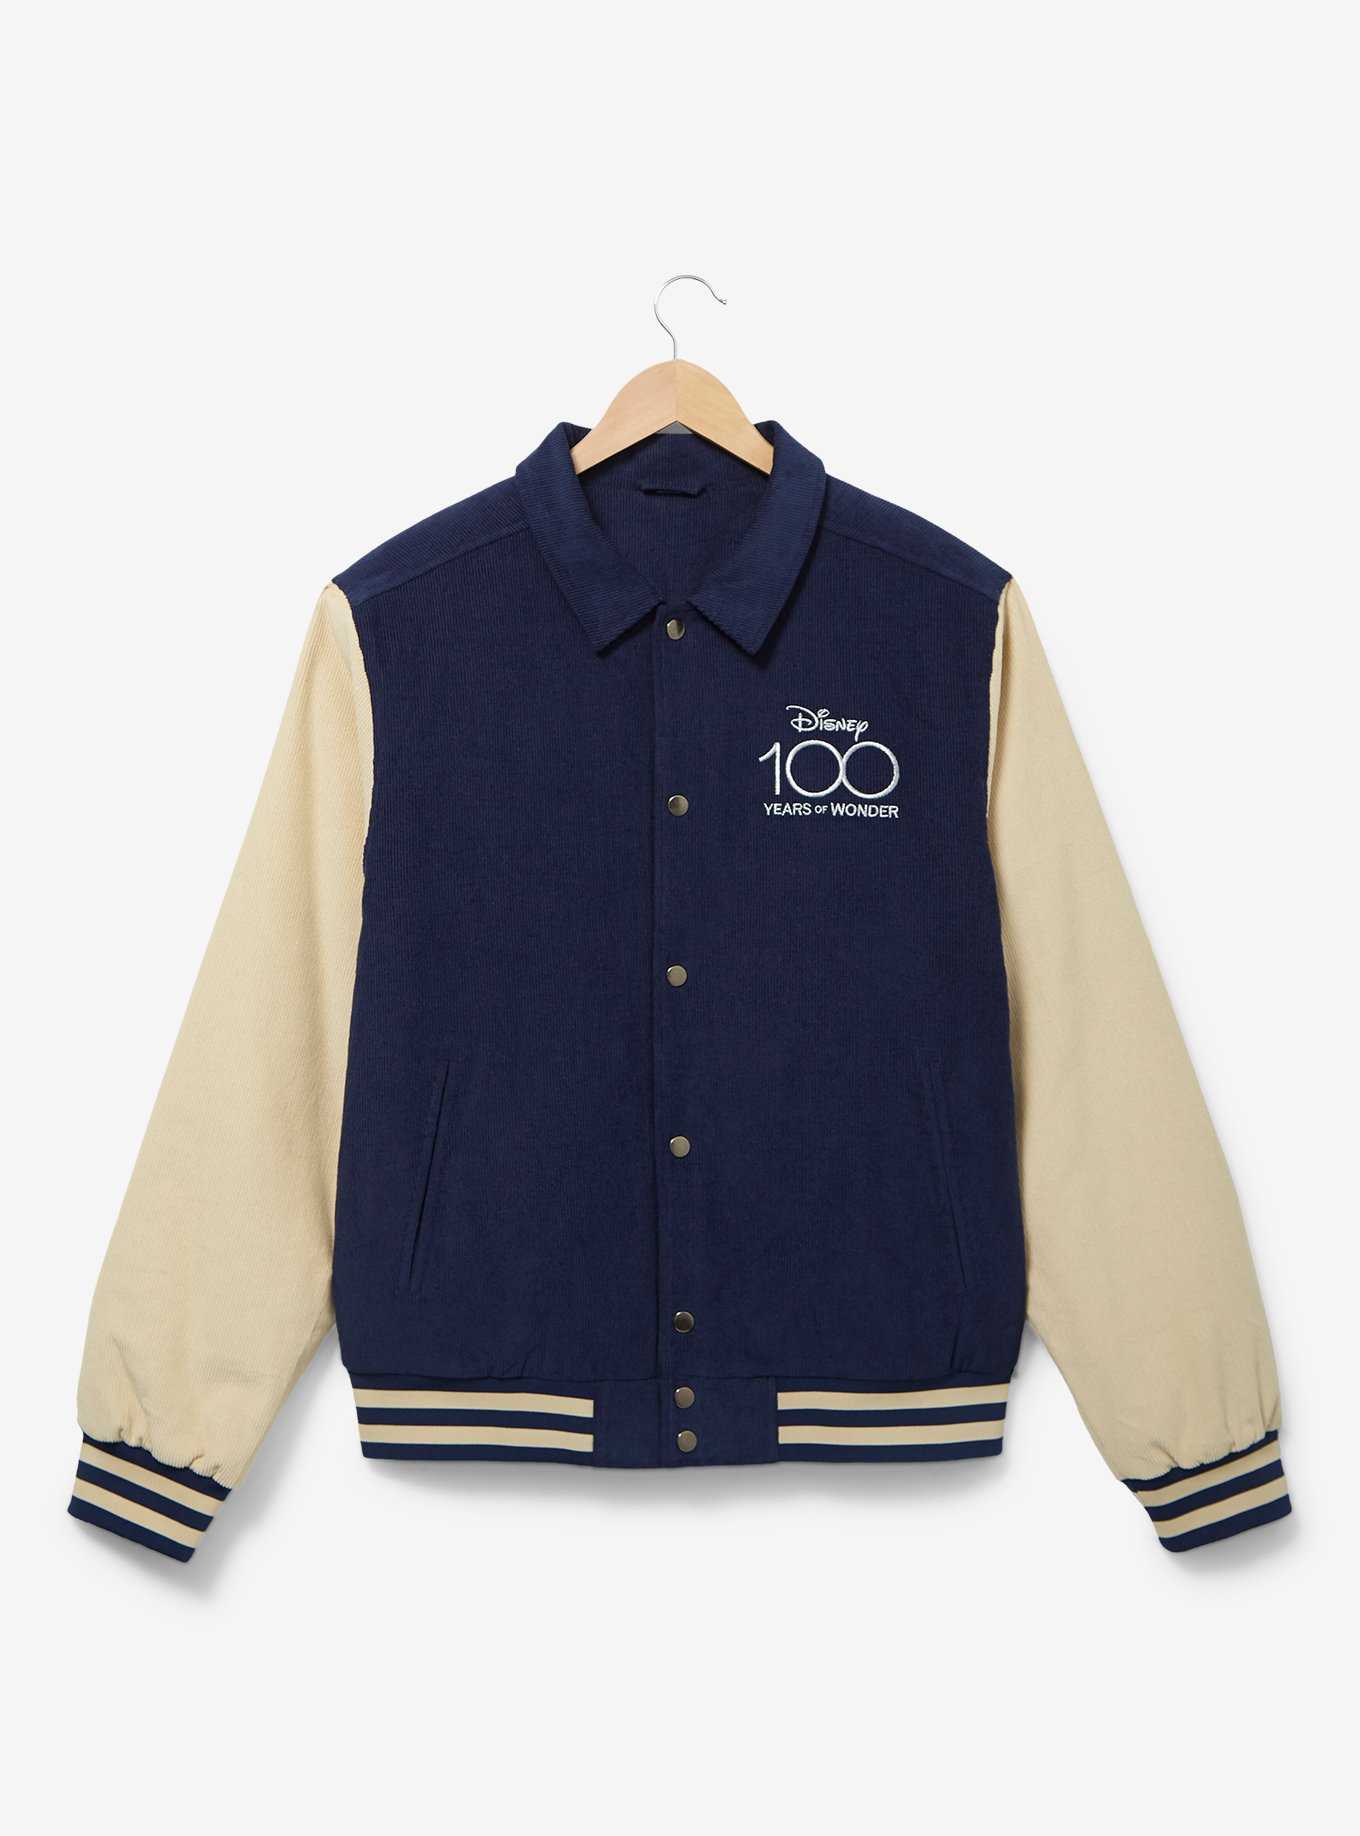 Disney 100 Mickey Mouse Collared Varsity Jacket - BoxLunch Exclusive, , hi-res